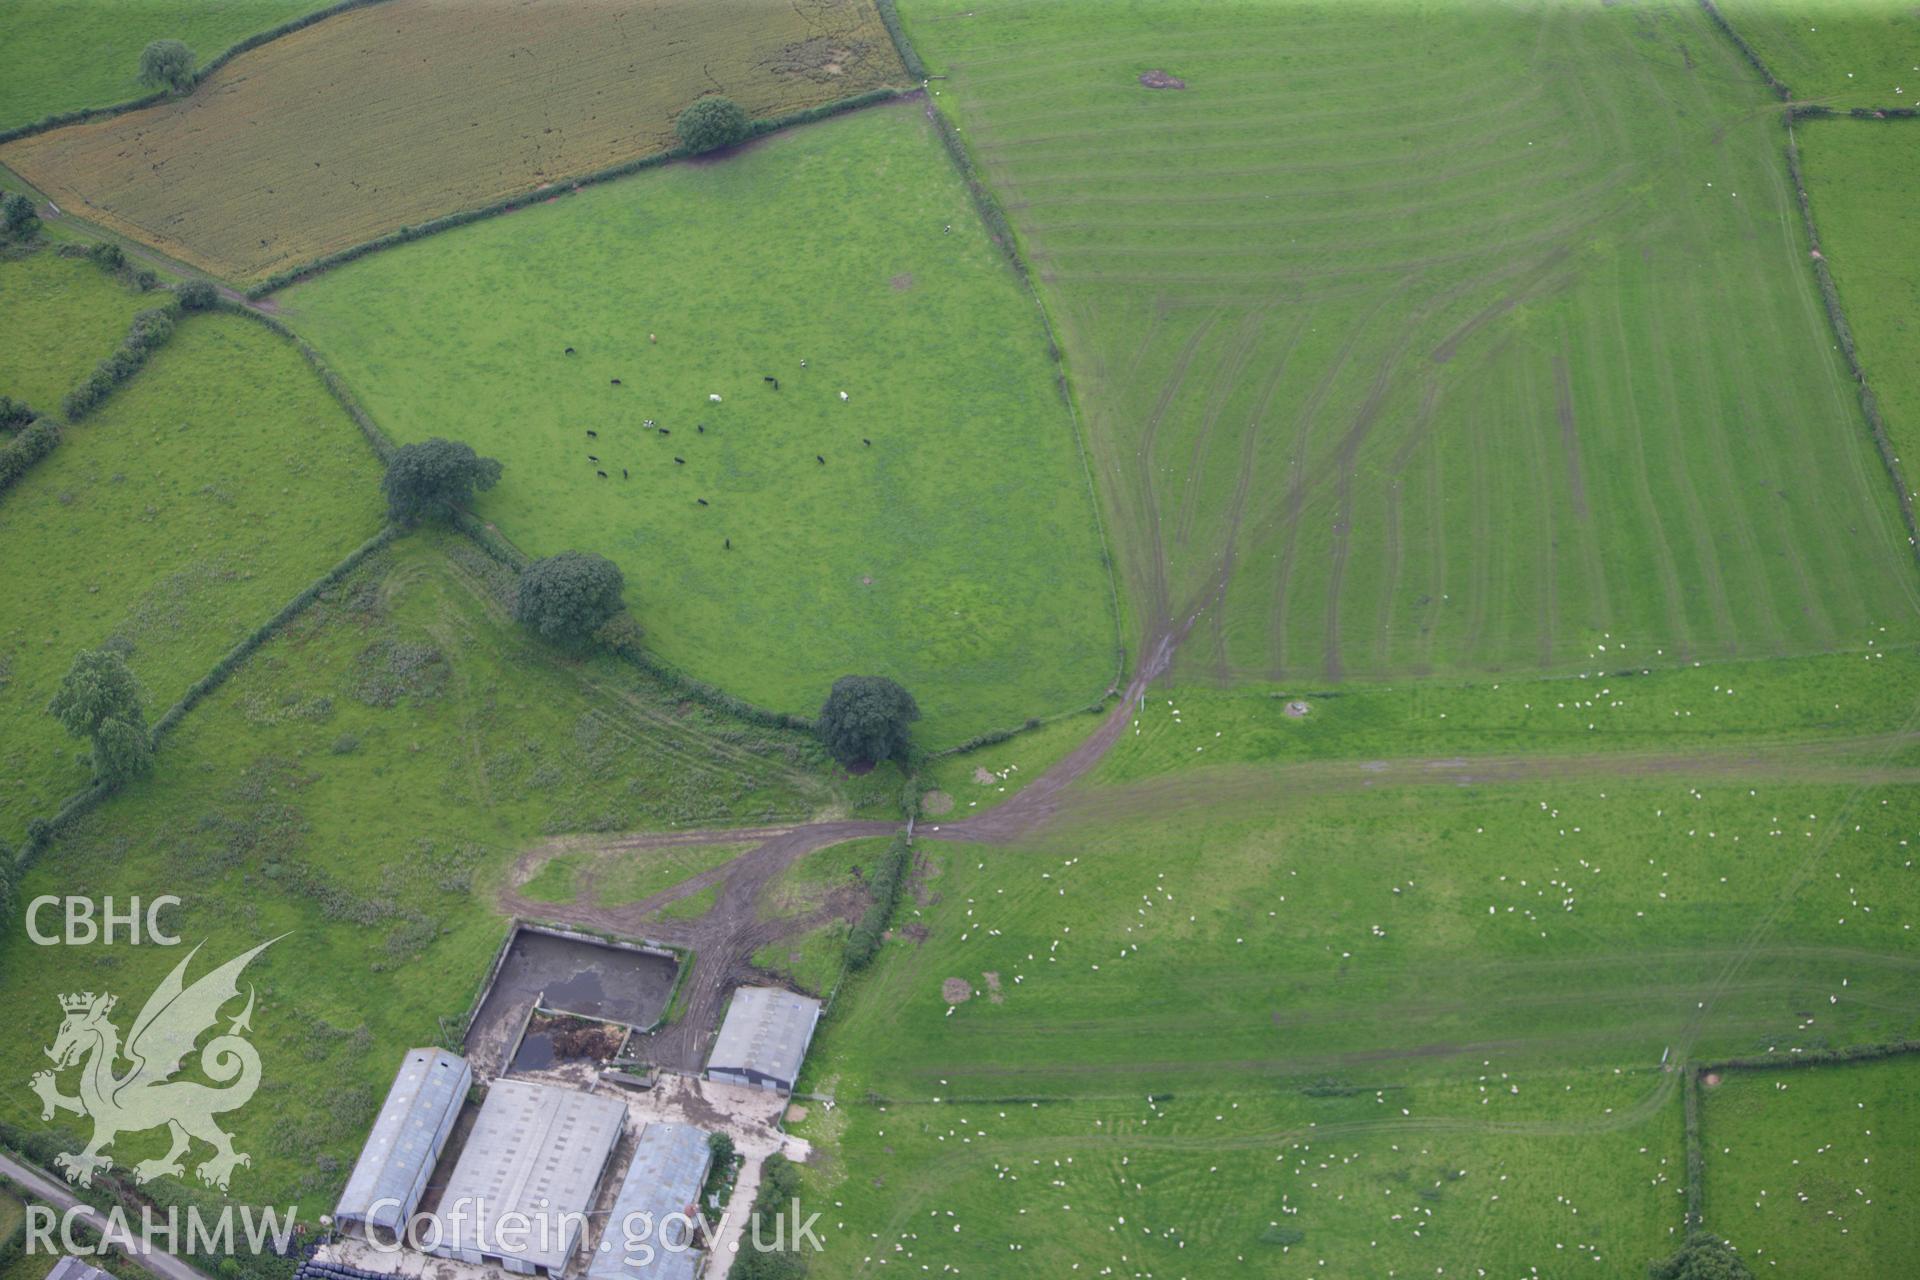 RCAHMW colour oblique aerial photograph of Llynfanod Round Barrow. Taken on 30 July 2009 by Toby Driver